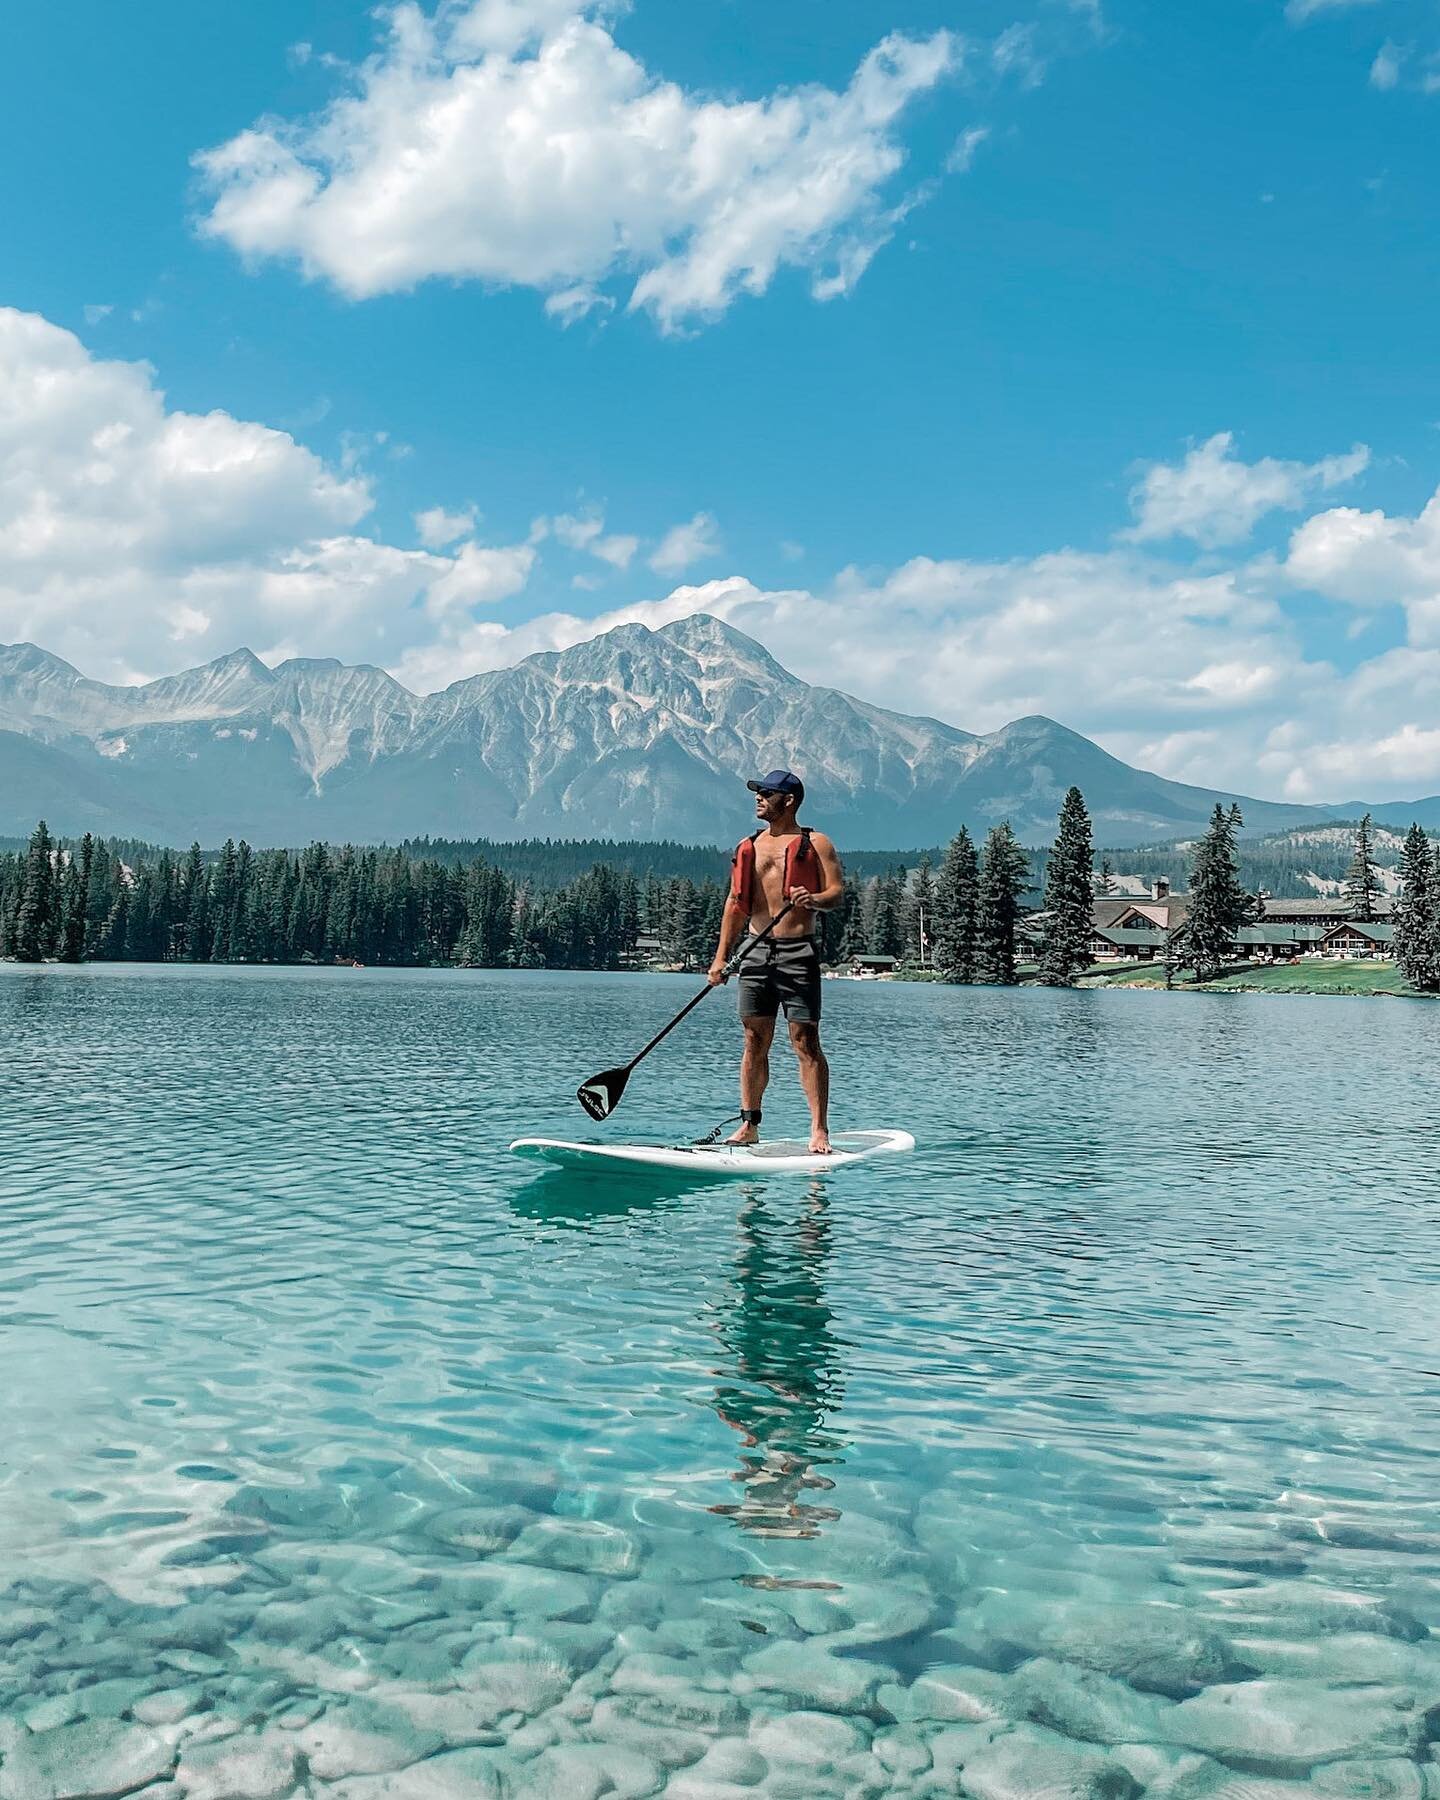 I&rsquo;ve paddled on many lakes, but paddle boarding on Lac Beauvert at the beautiful @fairmontjpl takes the cake. There&rsquo;s just something about the crystal clear emerald water set against the backdrop of the Rocky Mountains that is mesmerizing